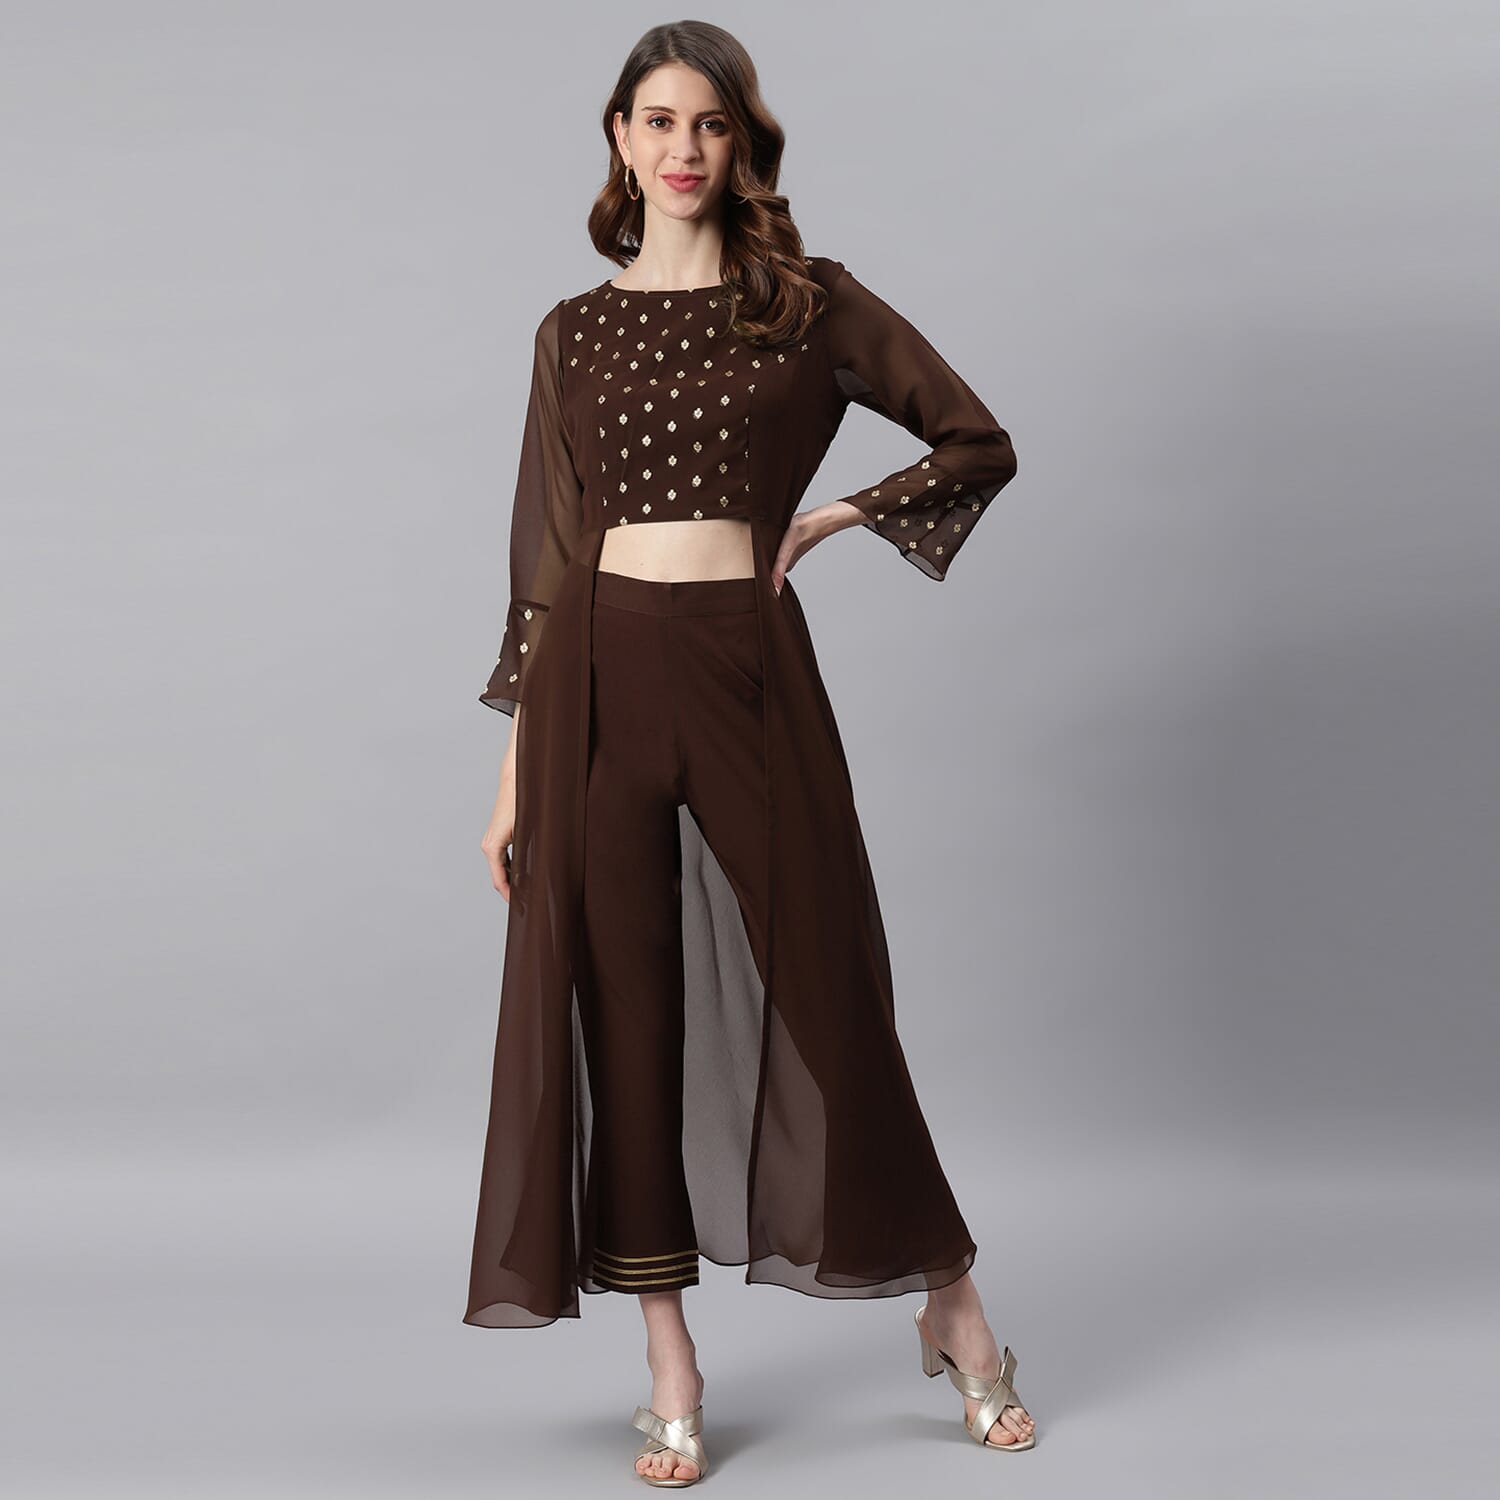 Janasya Indian Round Neck 3/4 Sleeve Ethnic Motifs Brown Georgette Top With Pant For Women - image 3 of 8